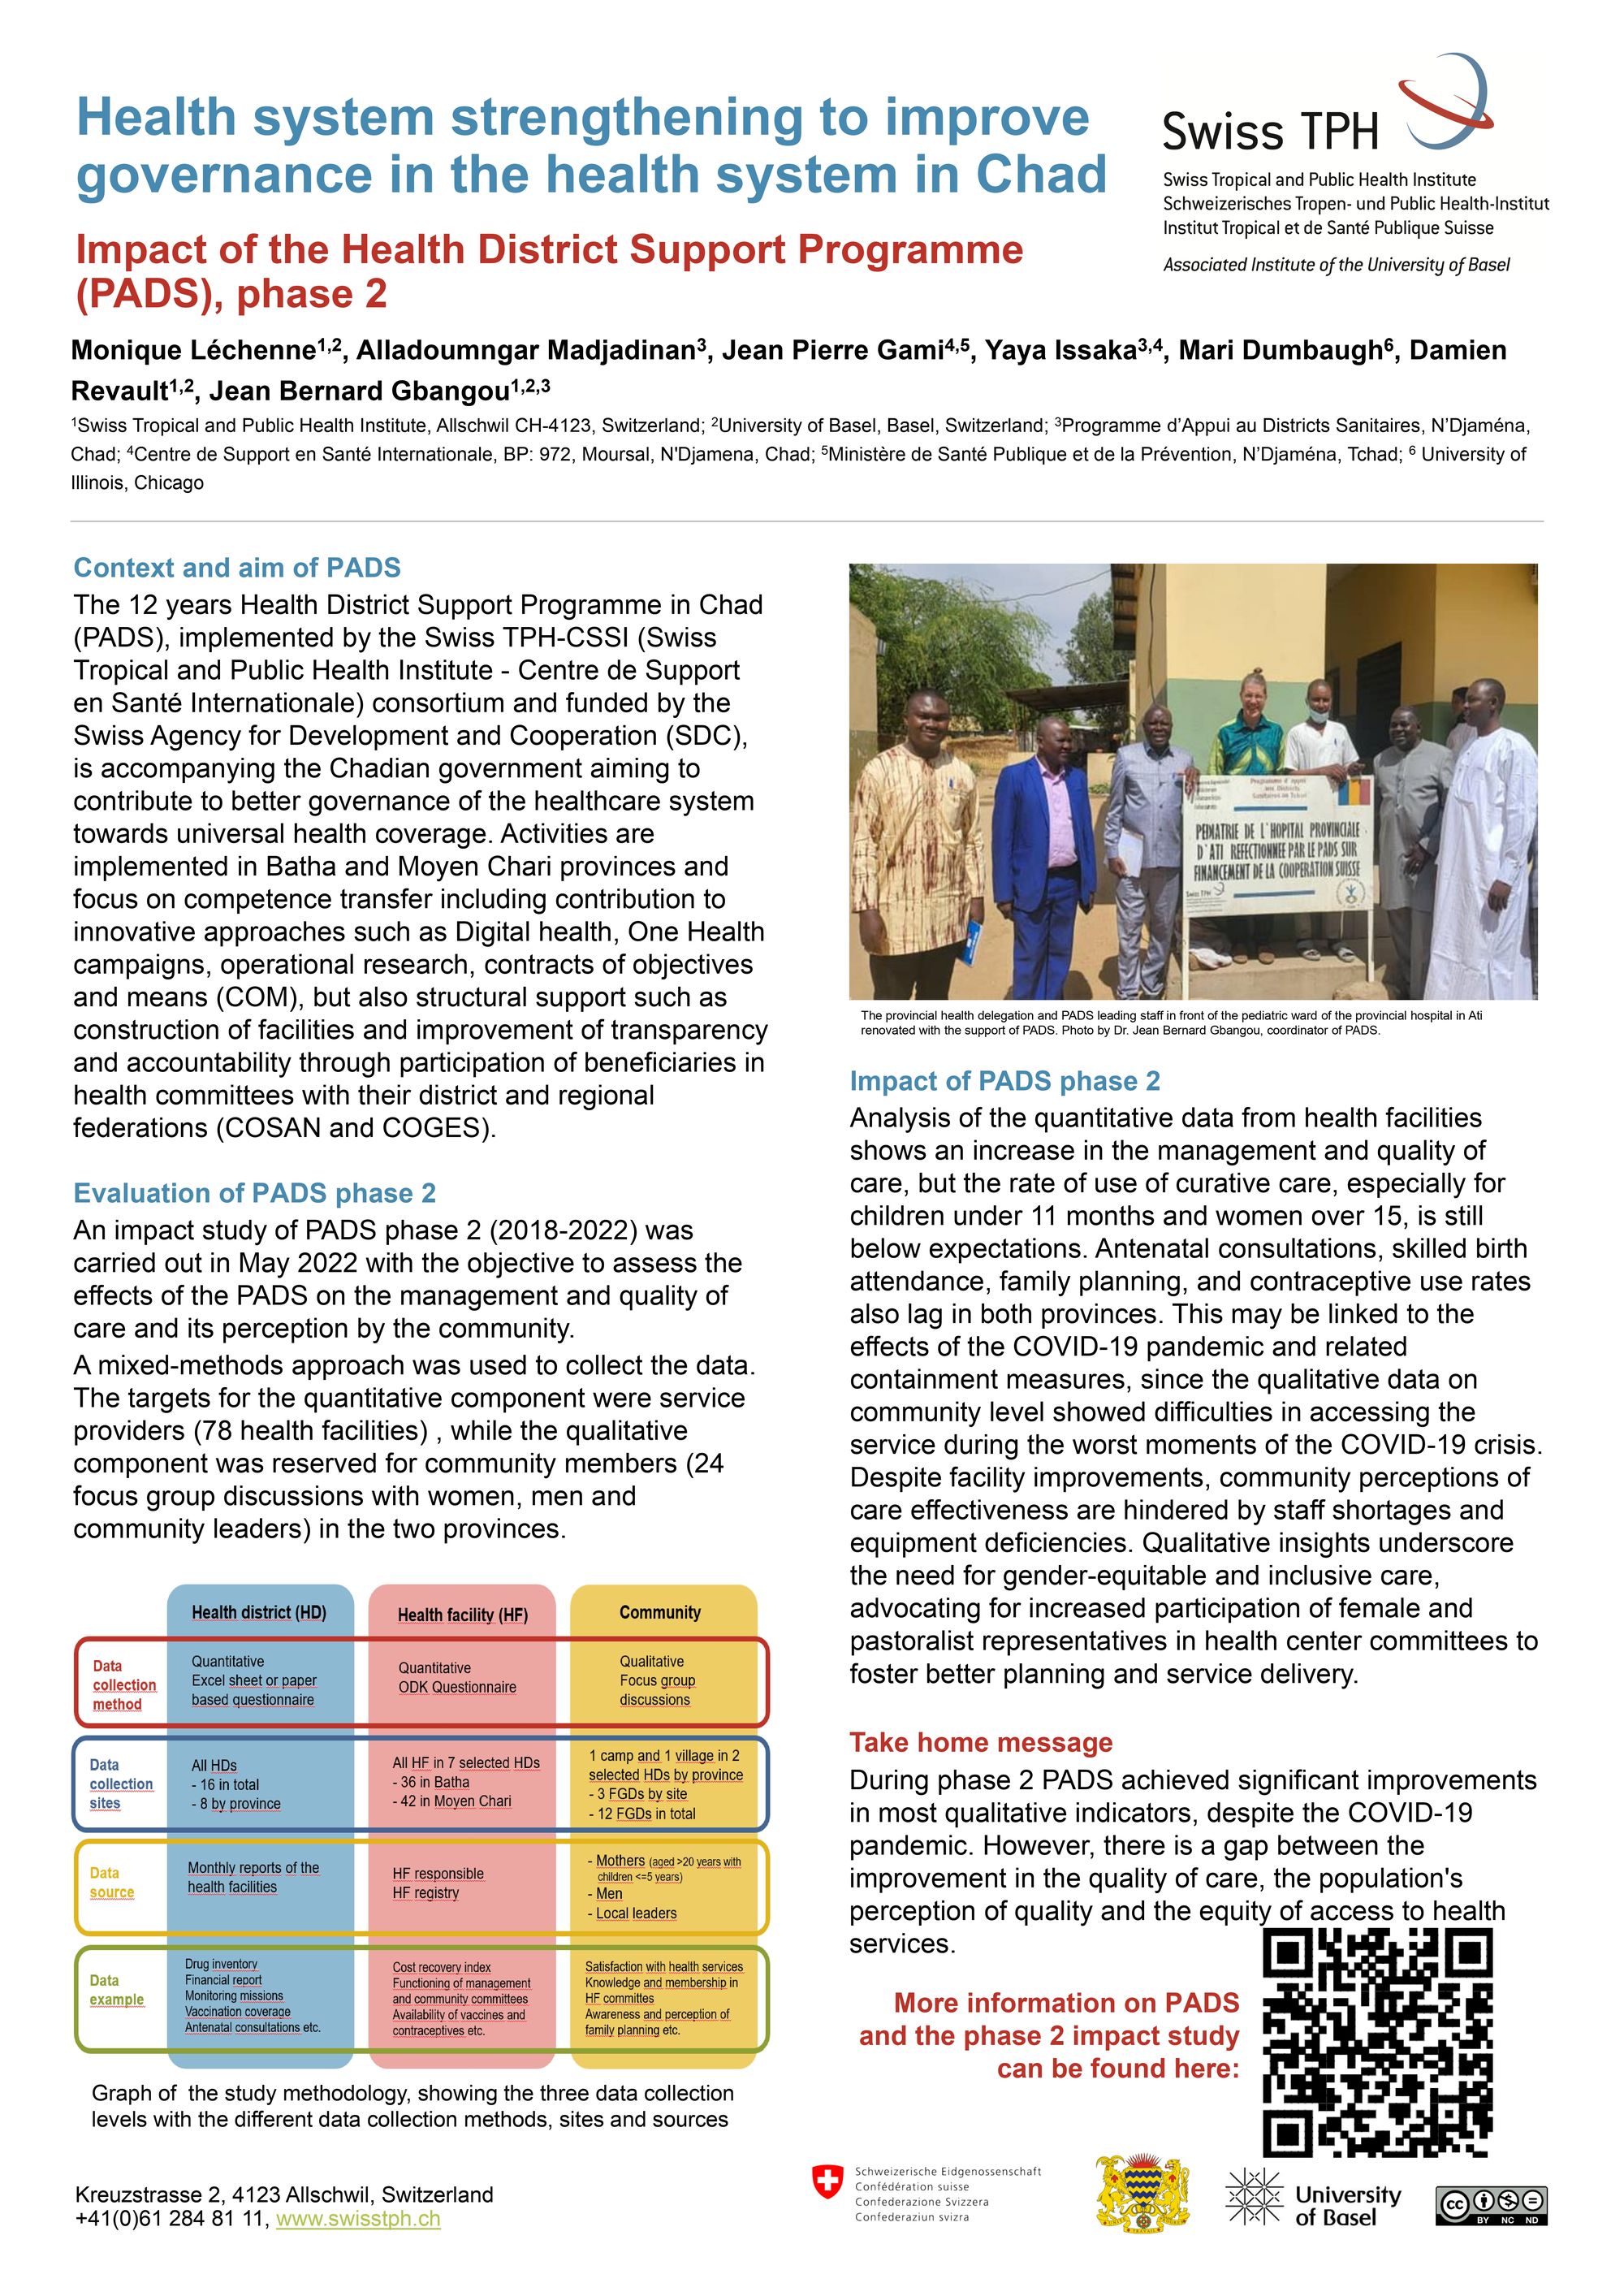 Health system strengthening to improve governance in the health system in Chad